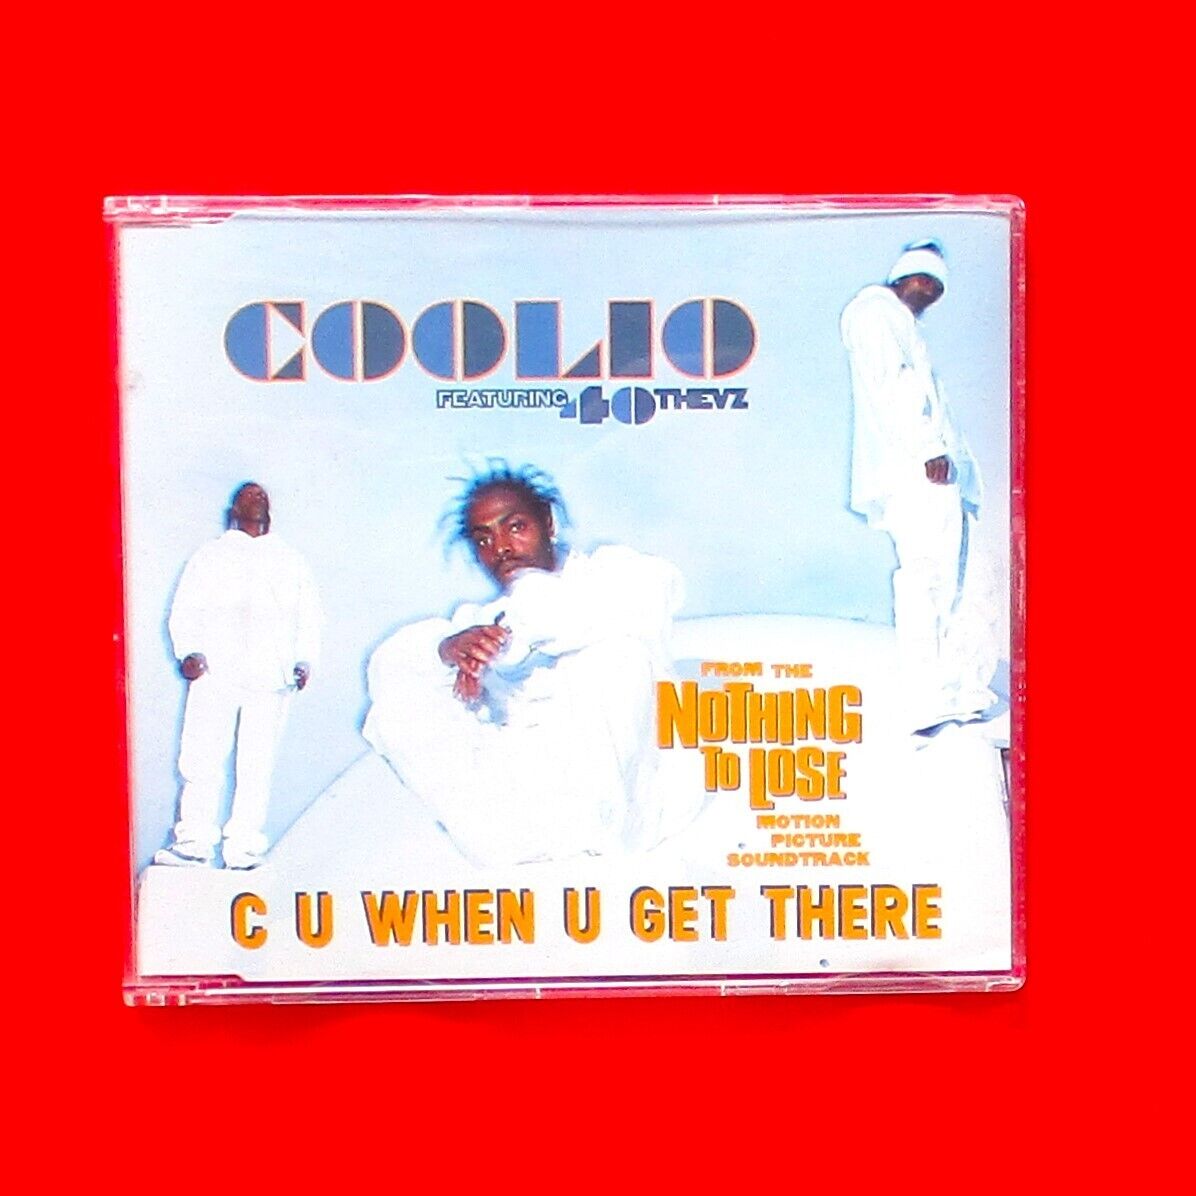 Coolio Featuring 40 Thevz C U When U Get There CD Single Australia 1997